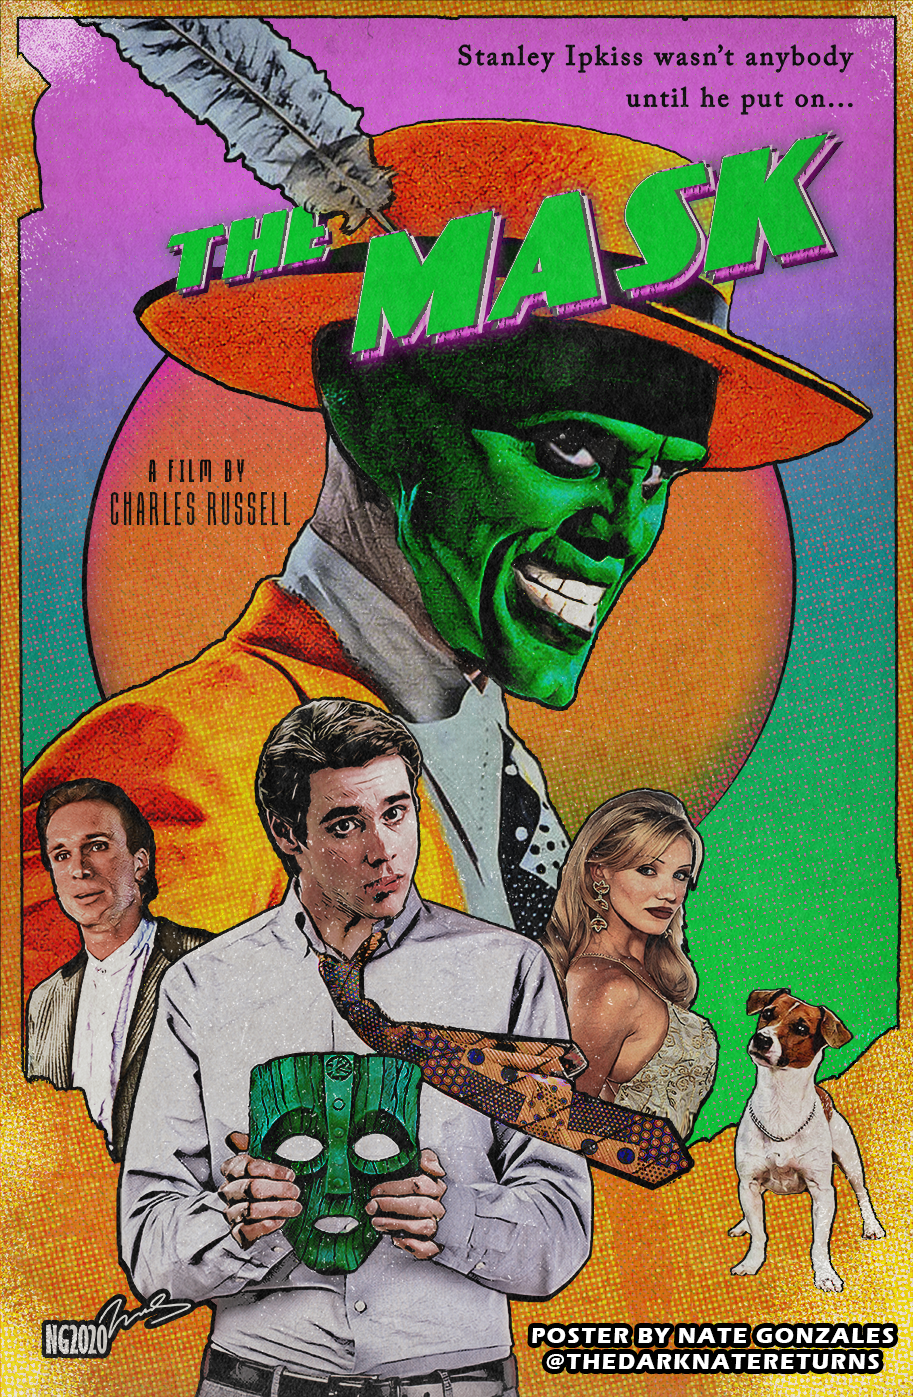 The Mask Movie Poster